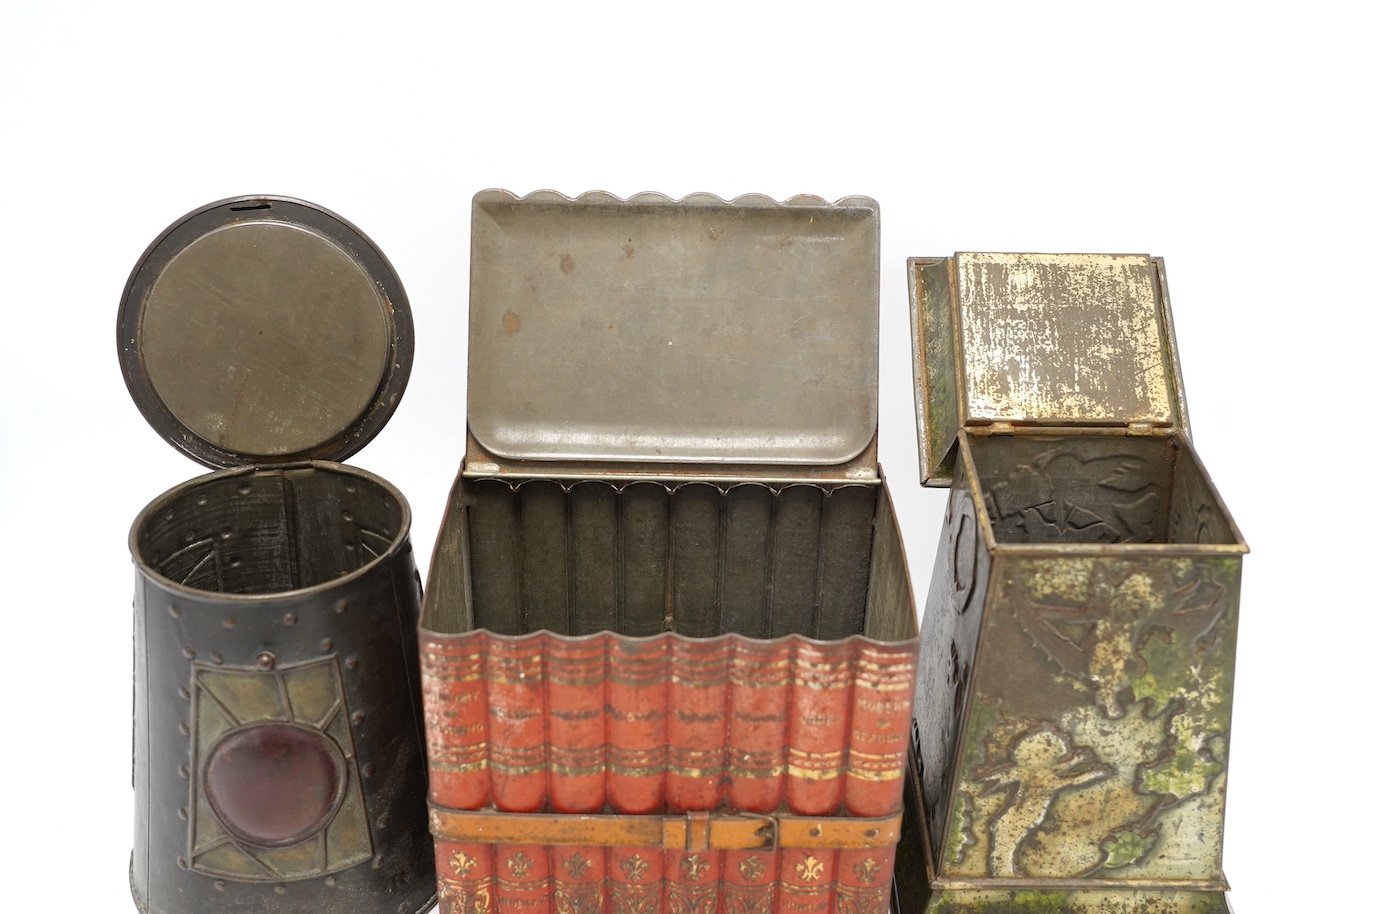 Three early 20th century Huntley & Palmer novelty biscuit tins, modelled as bound books, a sun dial and an Arts & Crafts lantern, largest 24cm high. Condition - fair